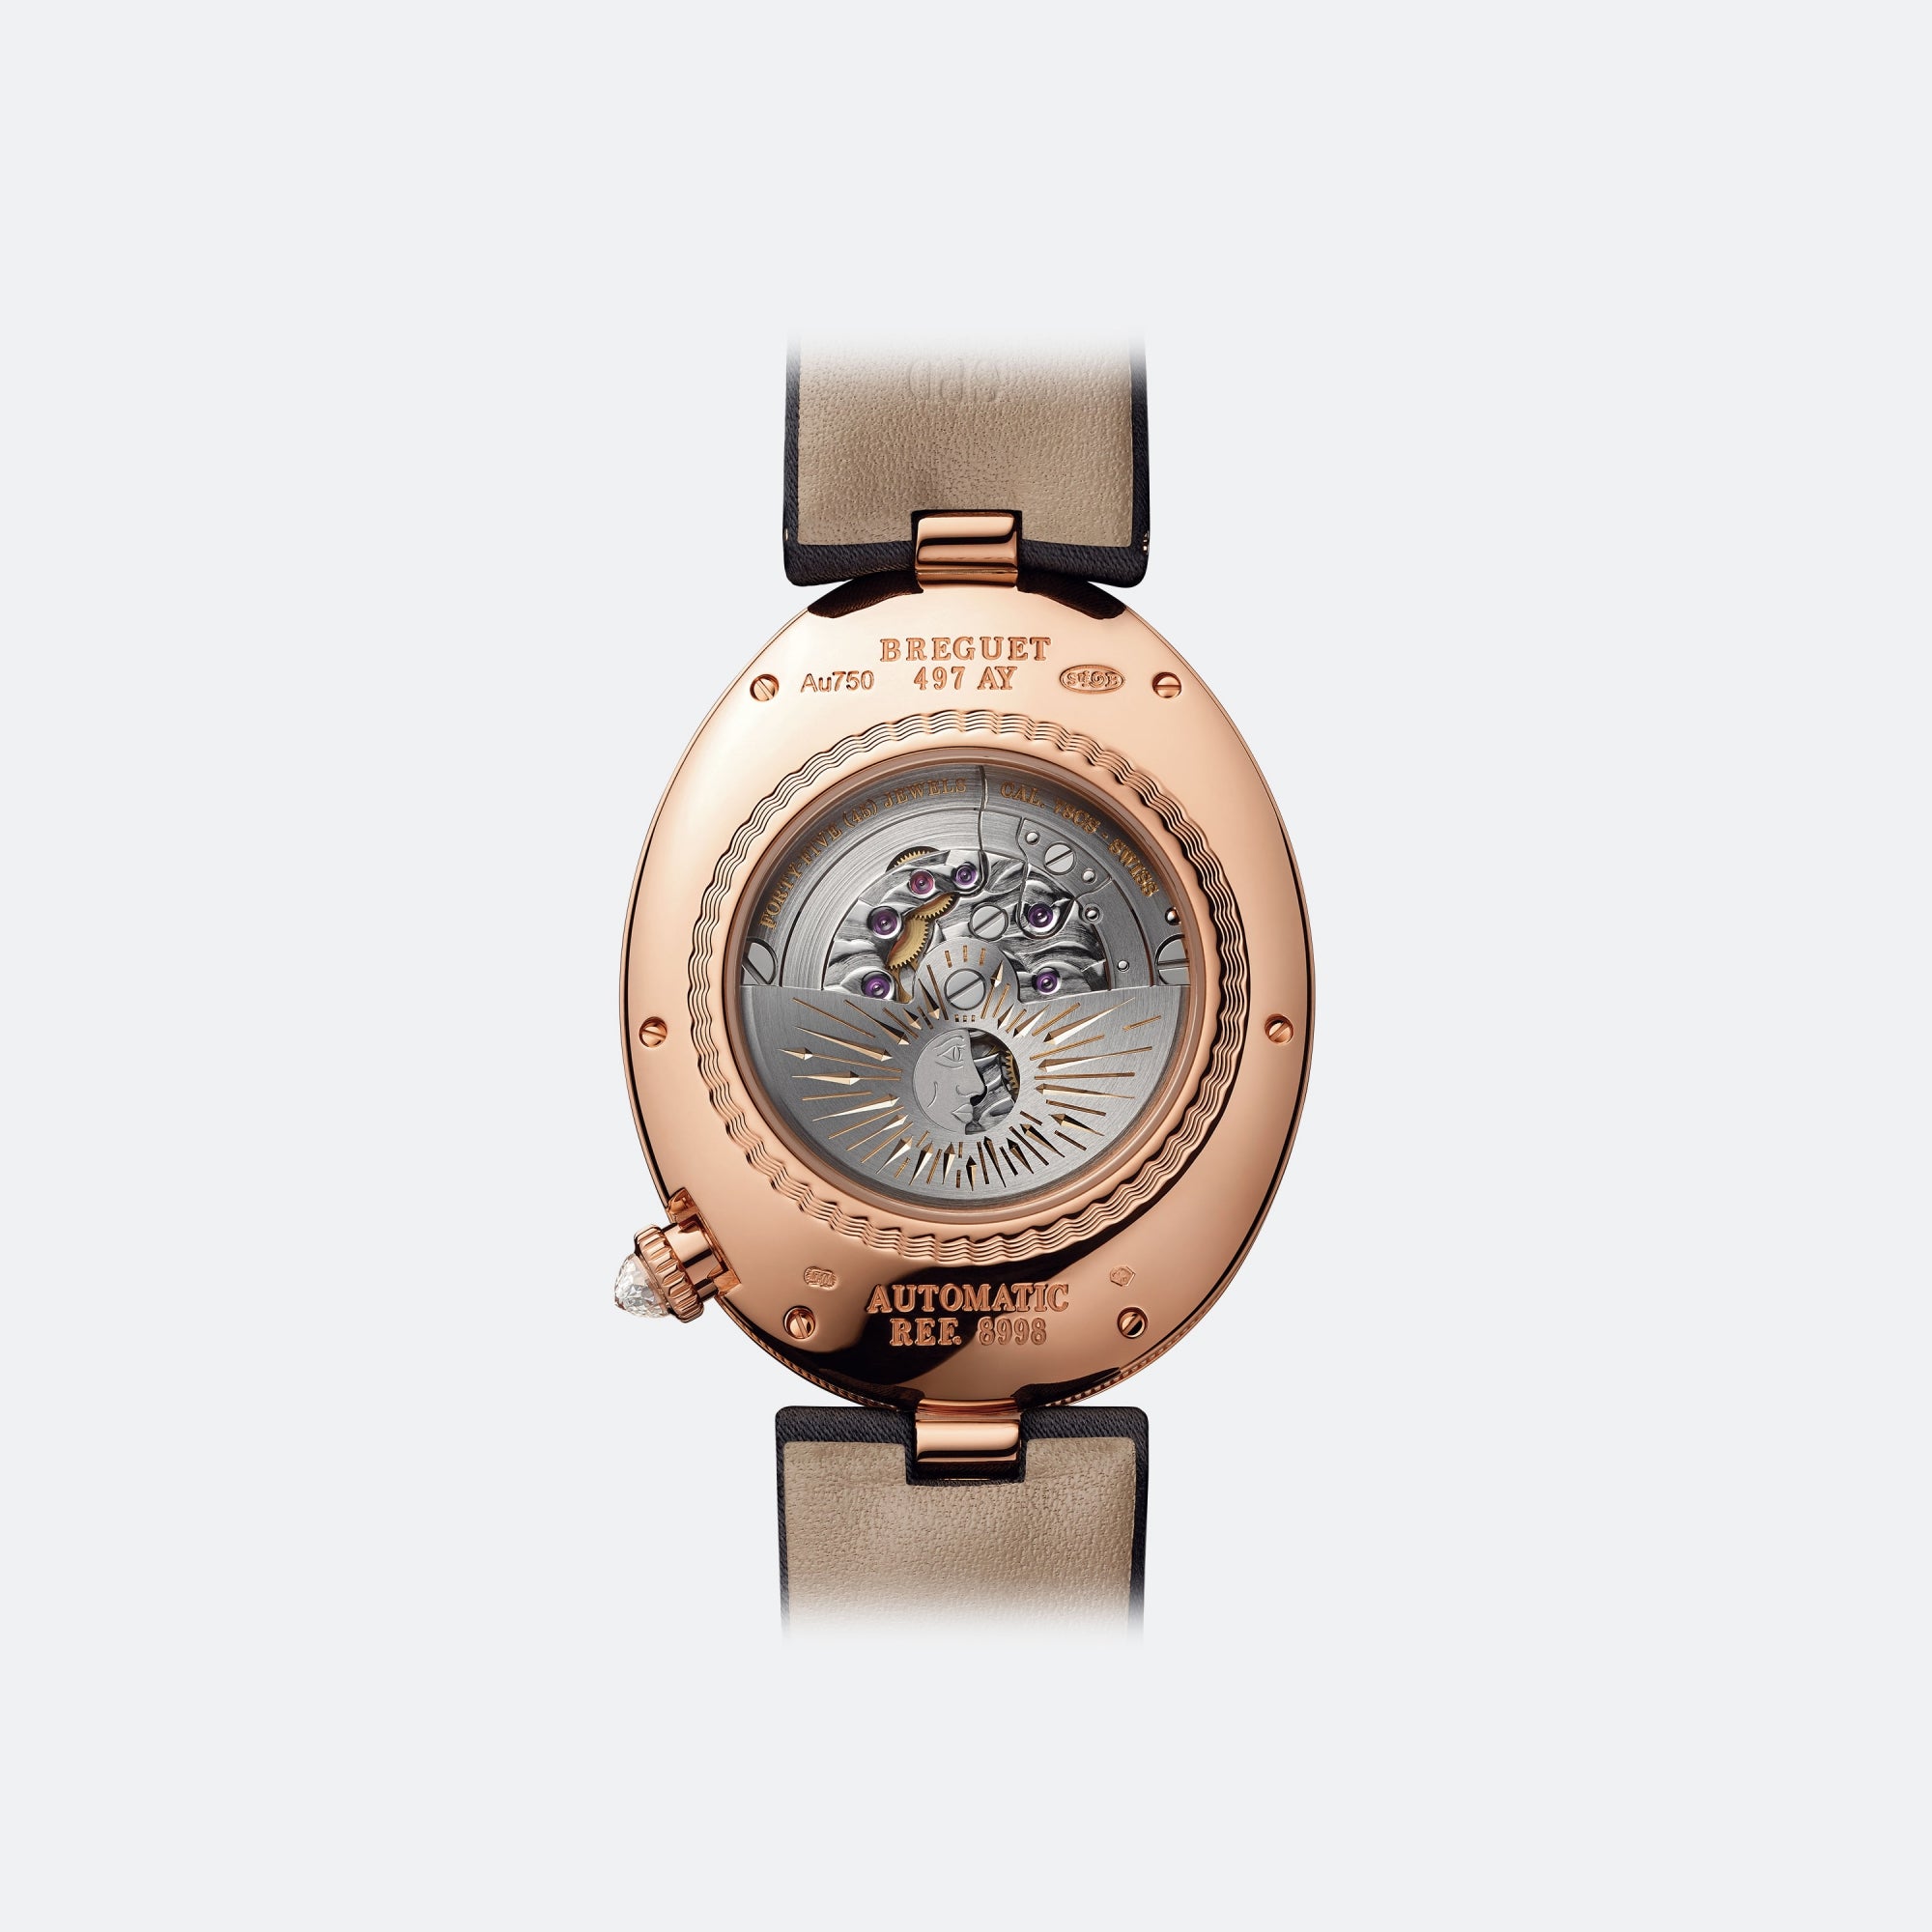 Queen of Naples “Day/Night” 8998 Grand Complication